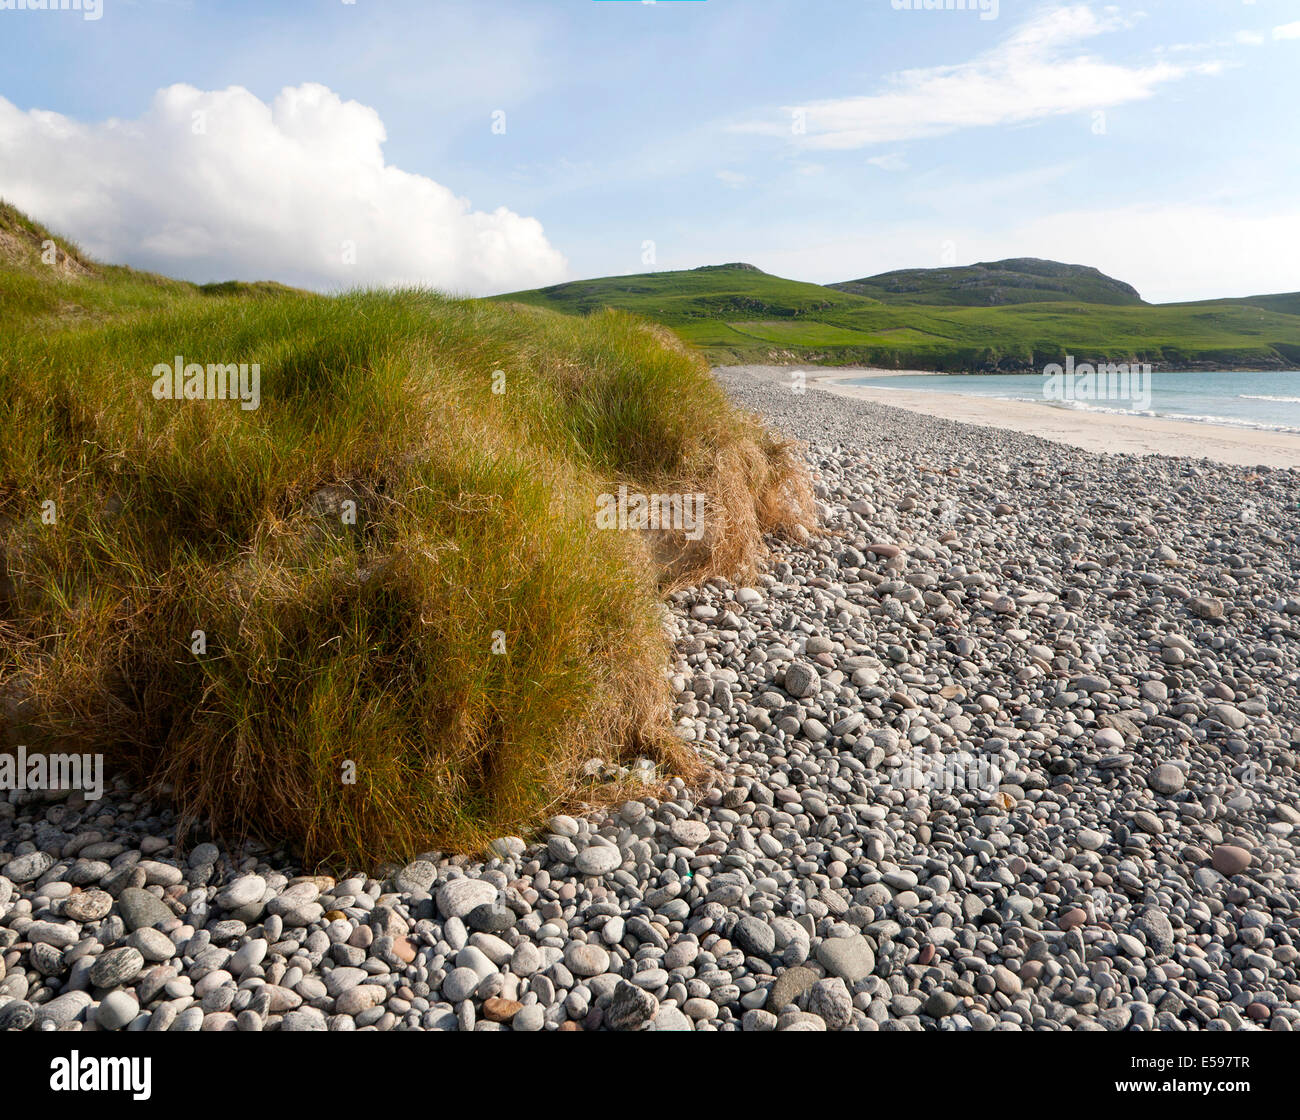 Low angle view of pebbles, sandy beach and dune vegetation on Traigh Siar beach, Vatersay, Barra, Outer Hebrides, Scotland Stock Photo